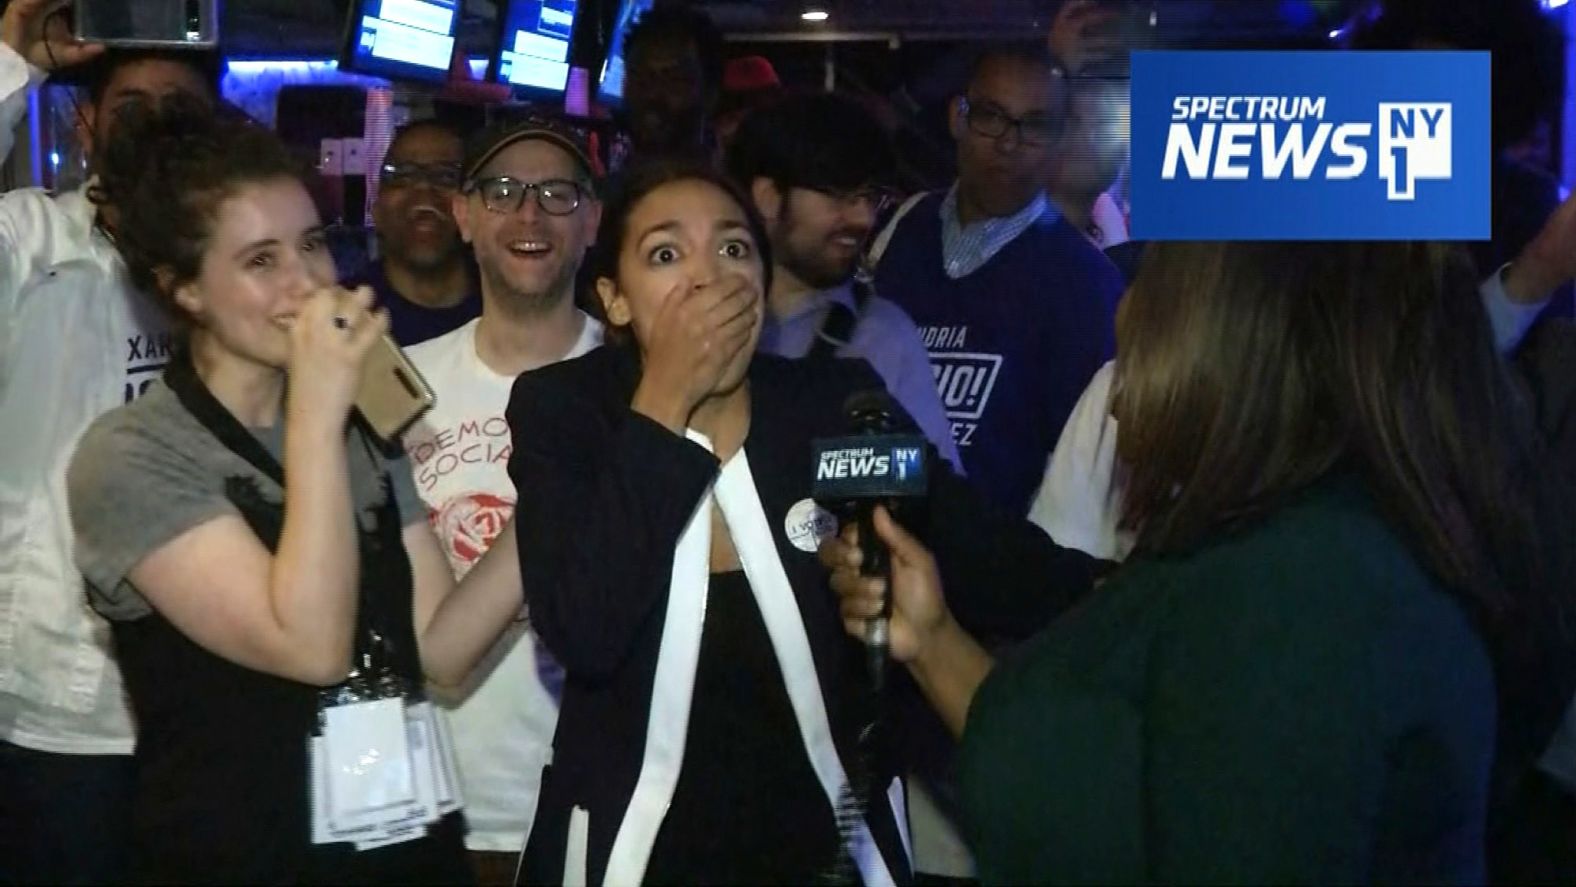 This image, taken from video, shows Ocasio-Cortez reacting to results on election night.